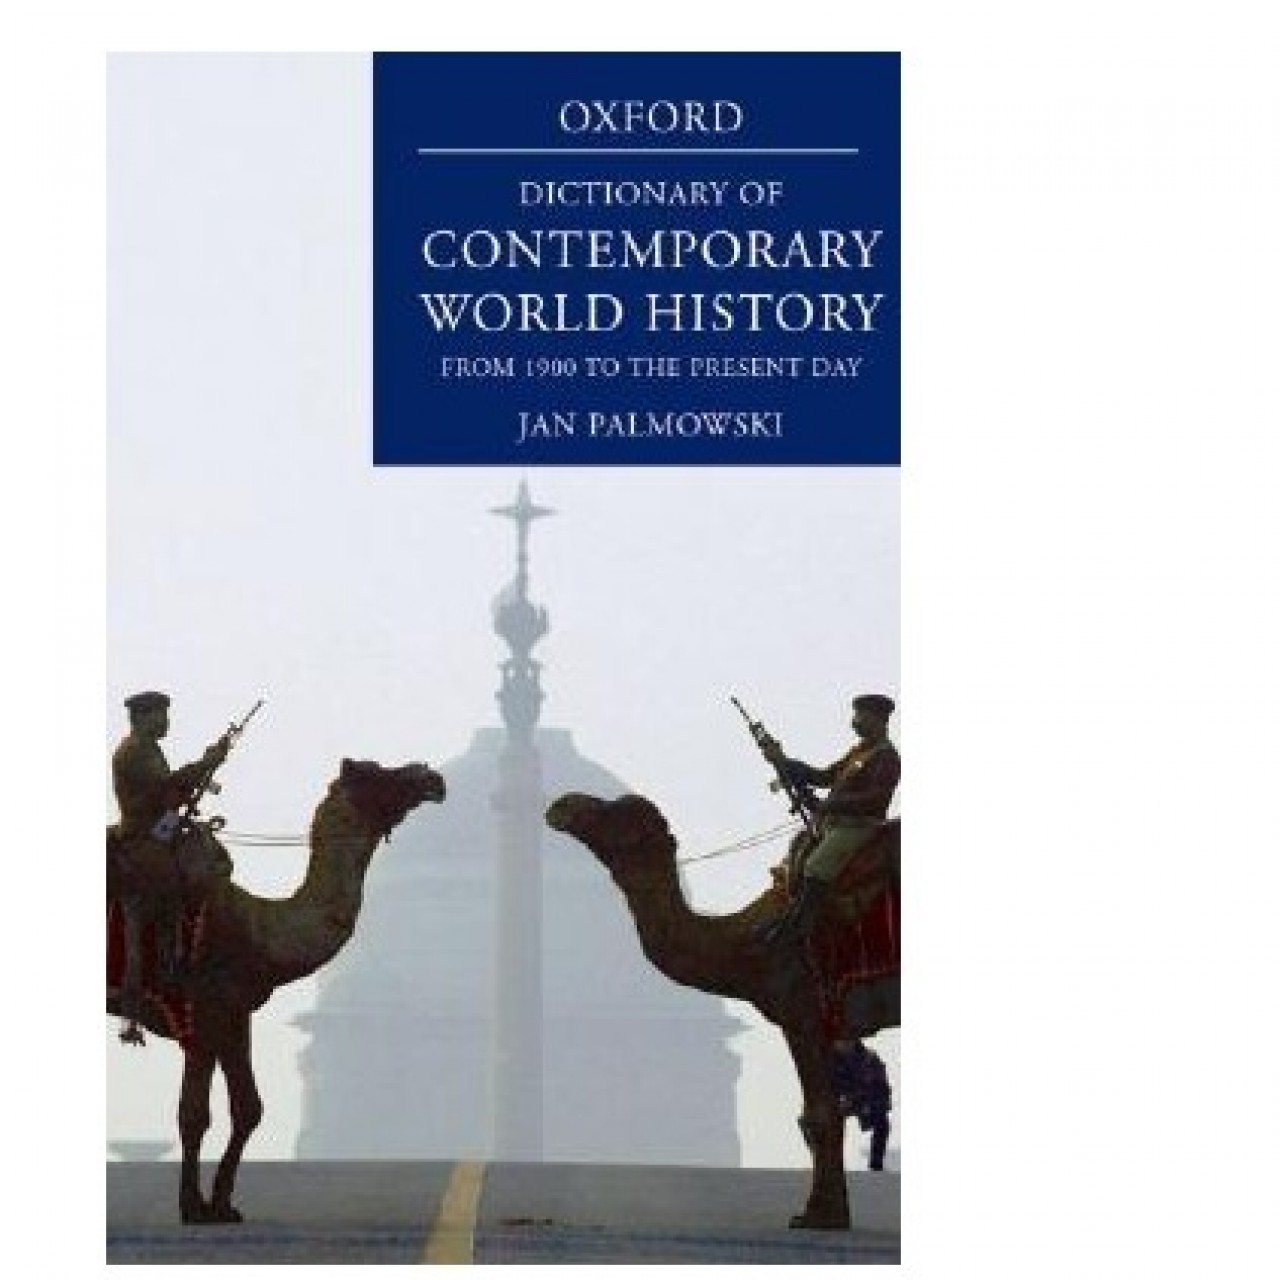 Dictionary Of Contemporary World History: From 1900 To The Present Day by Jan Palmowski